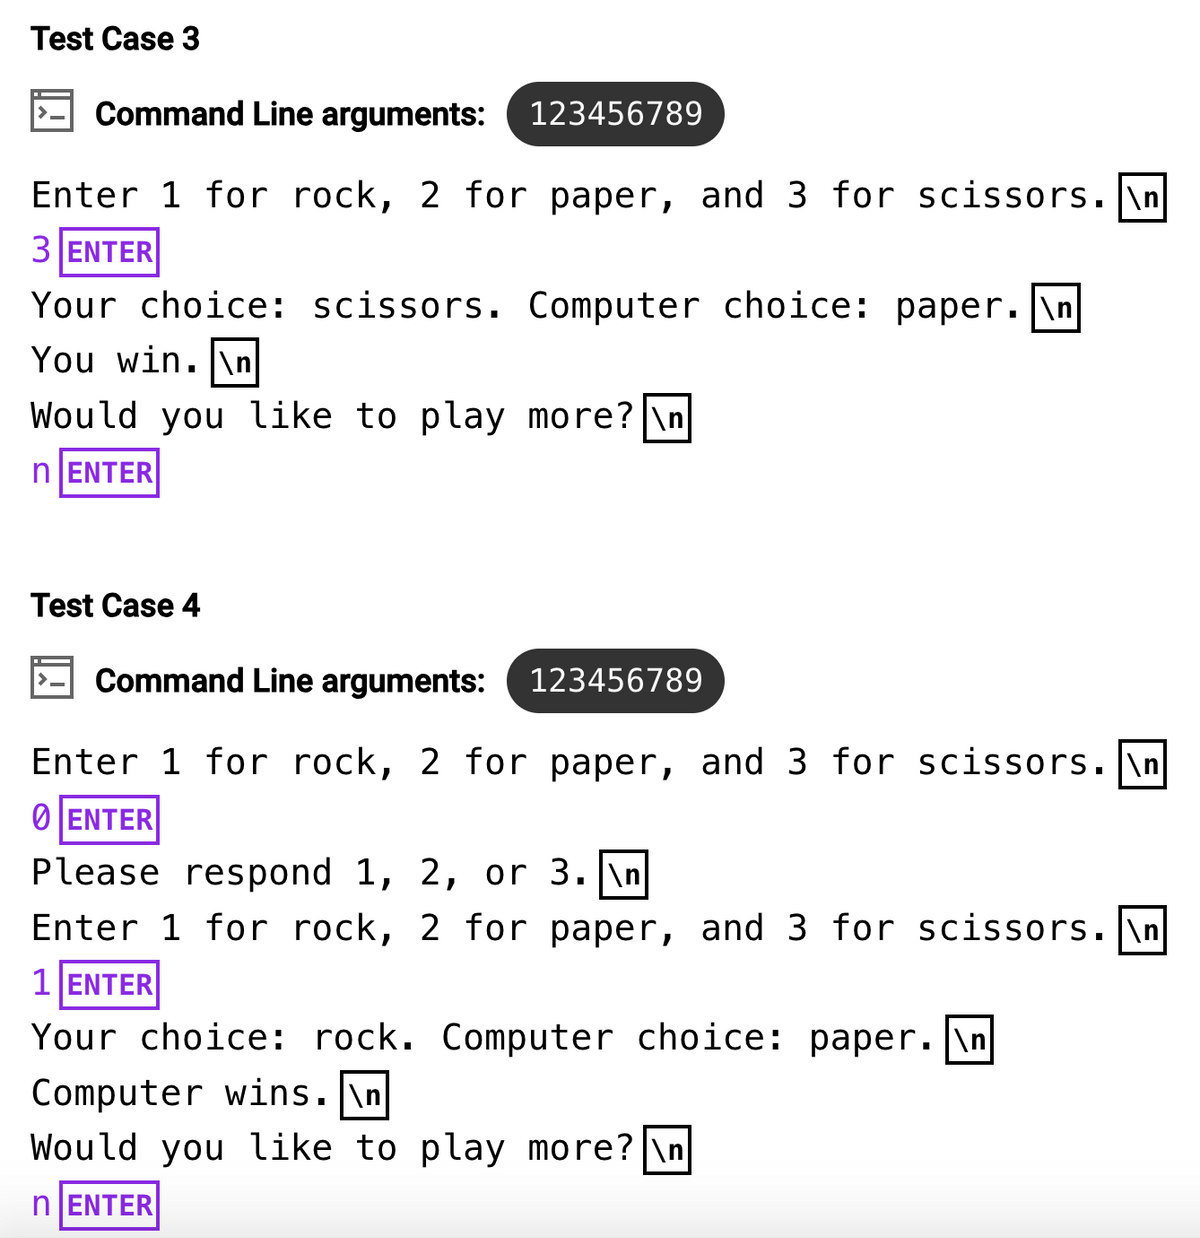 Test Case 3
Command Line arguments: 123456789
Enter 1 for rock, 2 for paper, and 3 for scissors. \n
3 ENTER
Your choice: scissors. Computer choice: paper. \n
You win. \n
Would you like to play more? \n
nENTER
Test Case 4
Command Line arguments: 123456789
Enter 1 for rock, 2 for paper, and 3 for scissors.\n
ⒸENTER
Please respond 1, 2, or 3. \n
Enter 1 for rock, 2 for paper, and 3 for scissors.\n
1 ENTER
Your choice: rock. Computer choice: paper. \n|
Computer wins.\n
Would you like to play more? \n
n ENTER